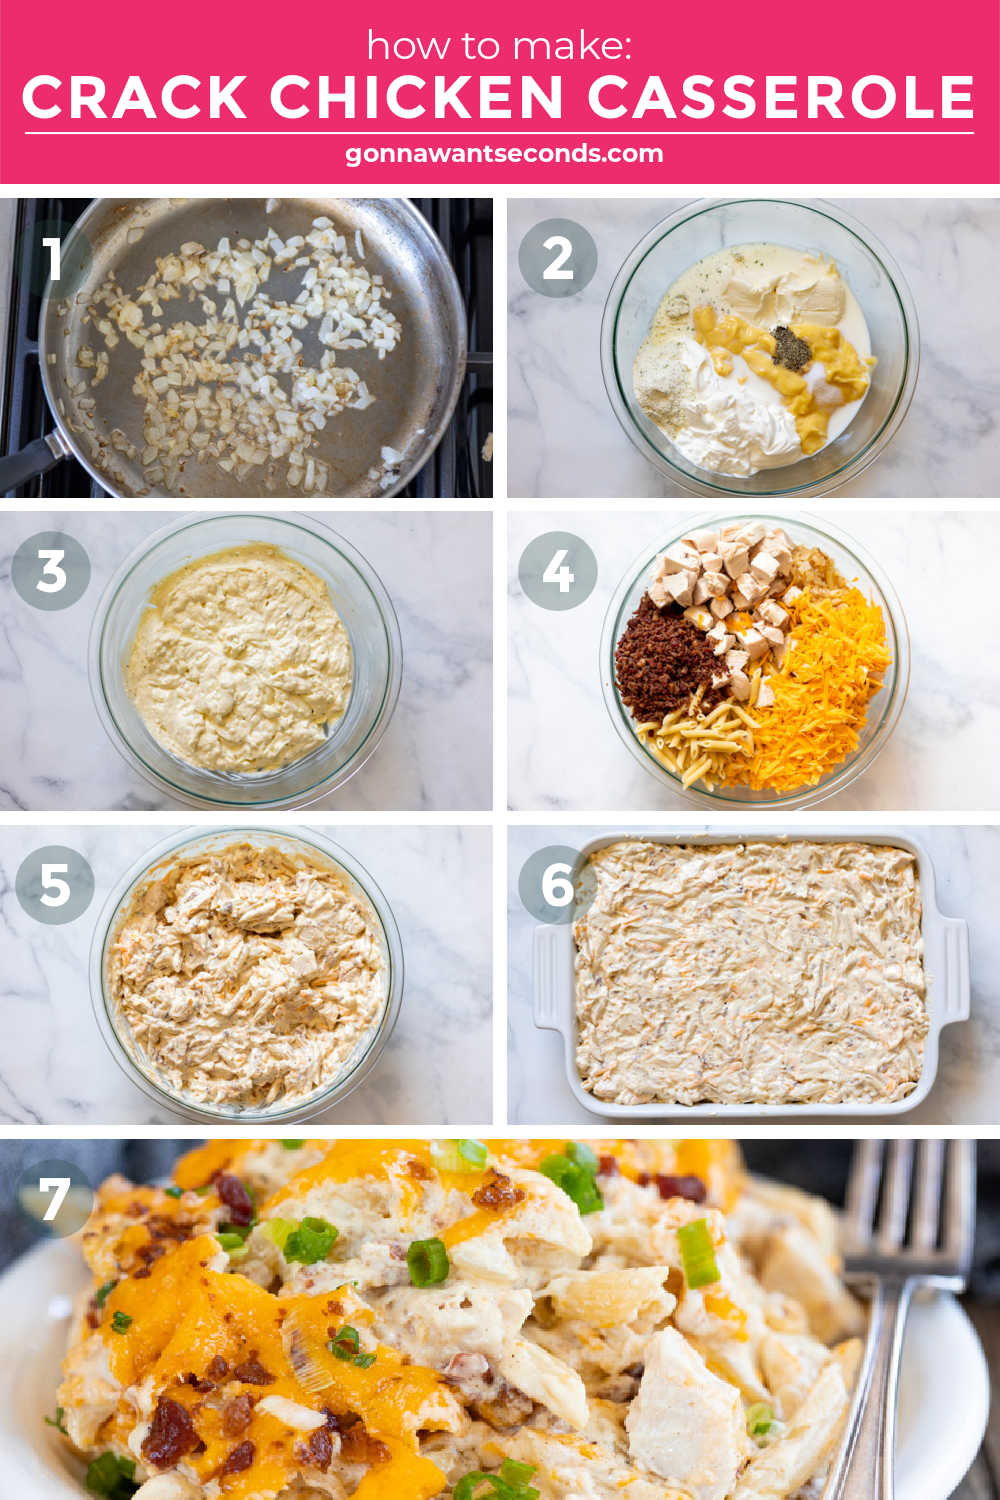 step by step how to make crack chicken casserole